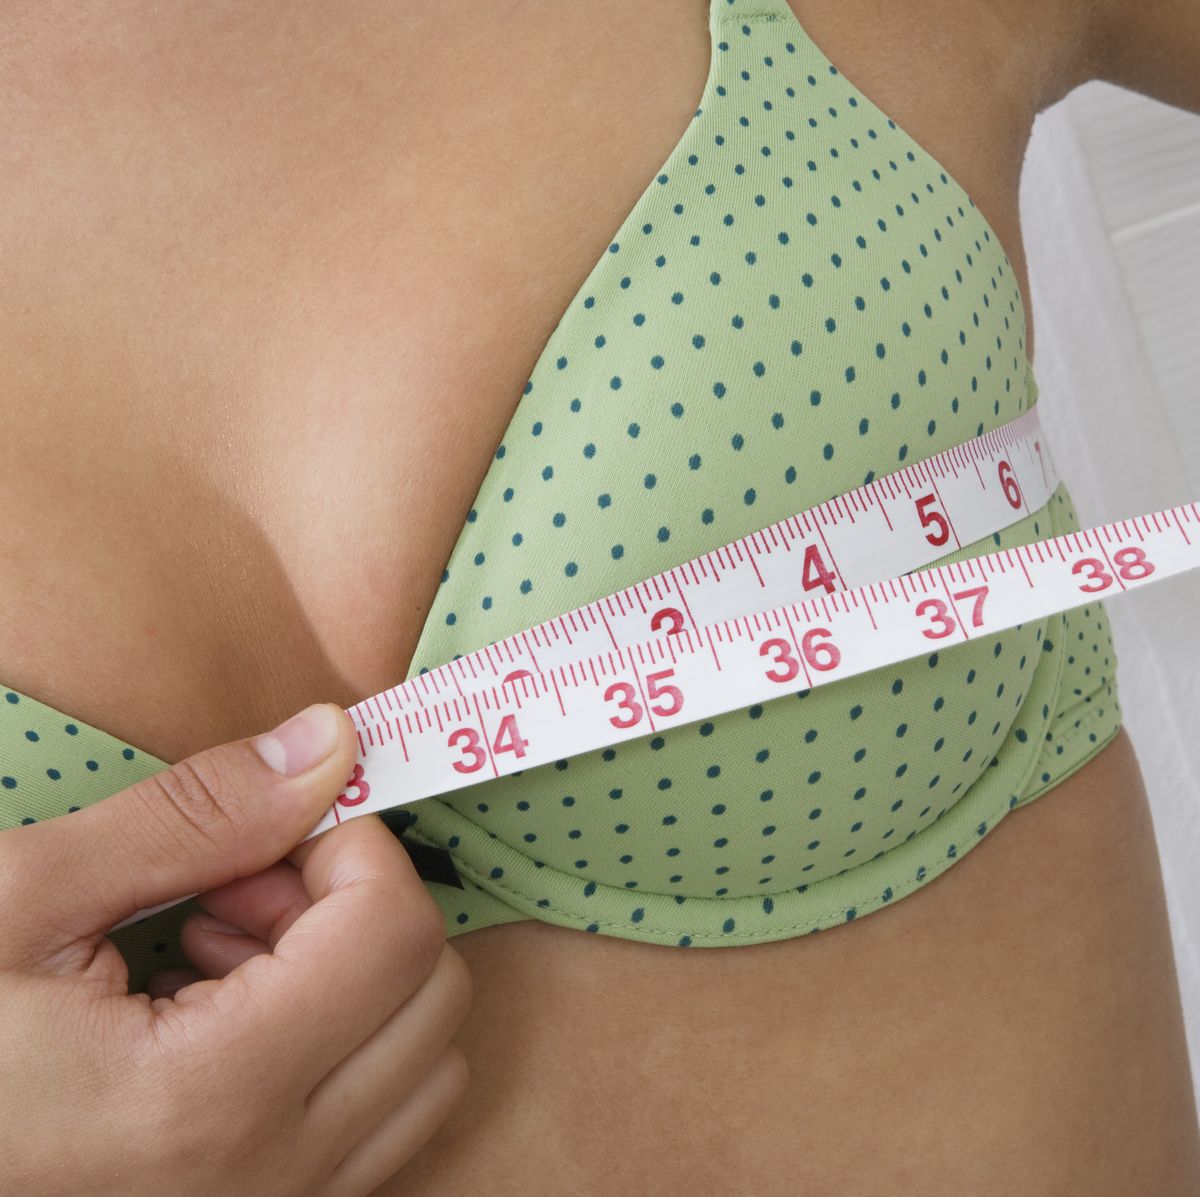 How To Measure Your Bra Size & Find The Right Bra: Calculate Your